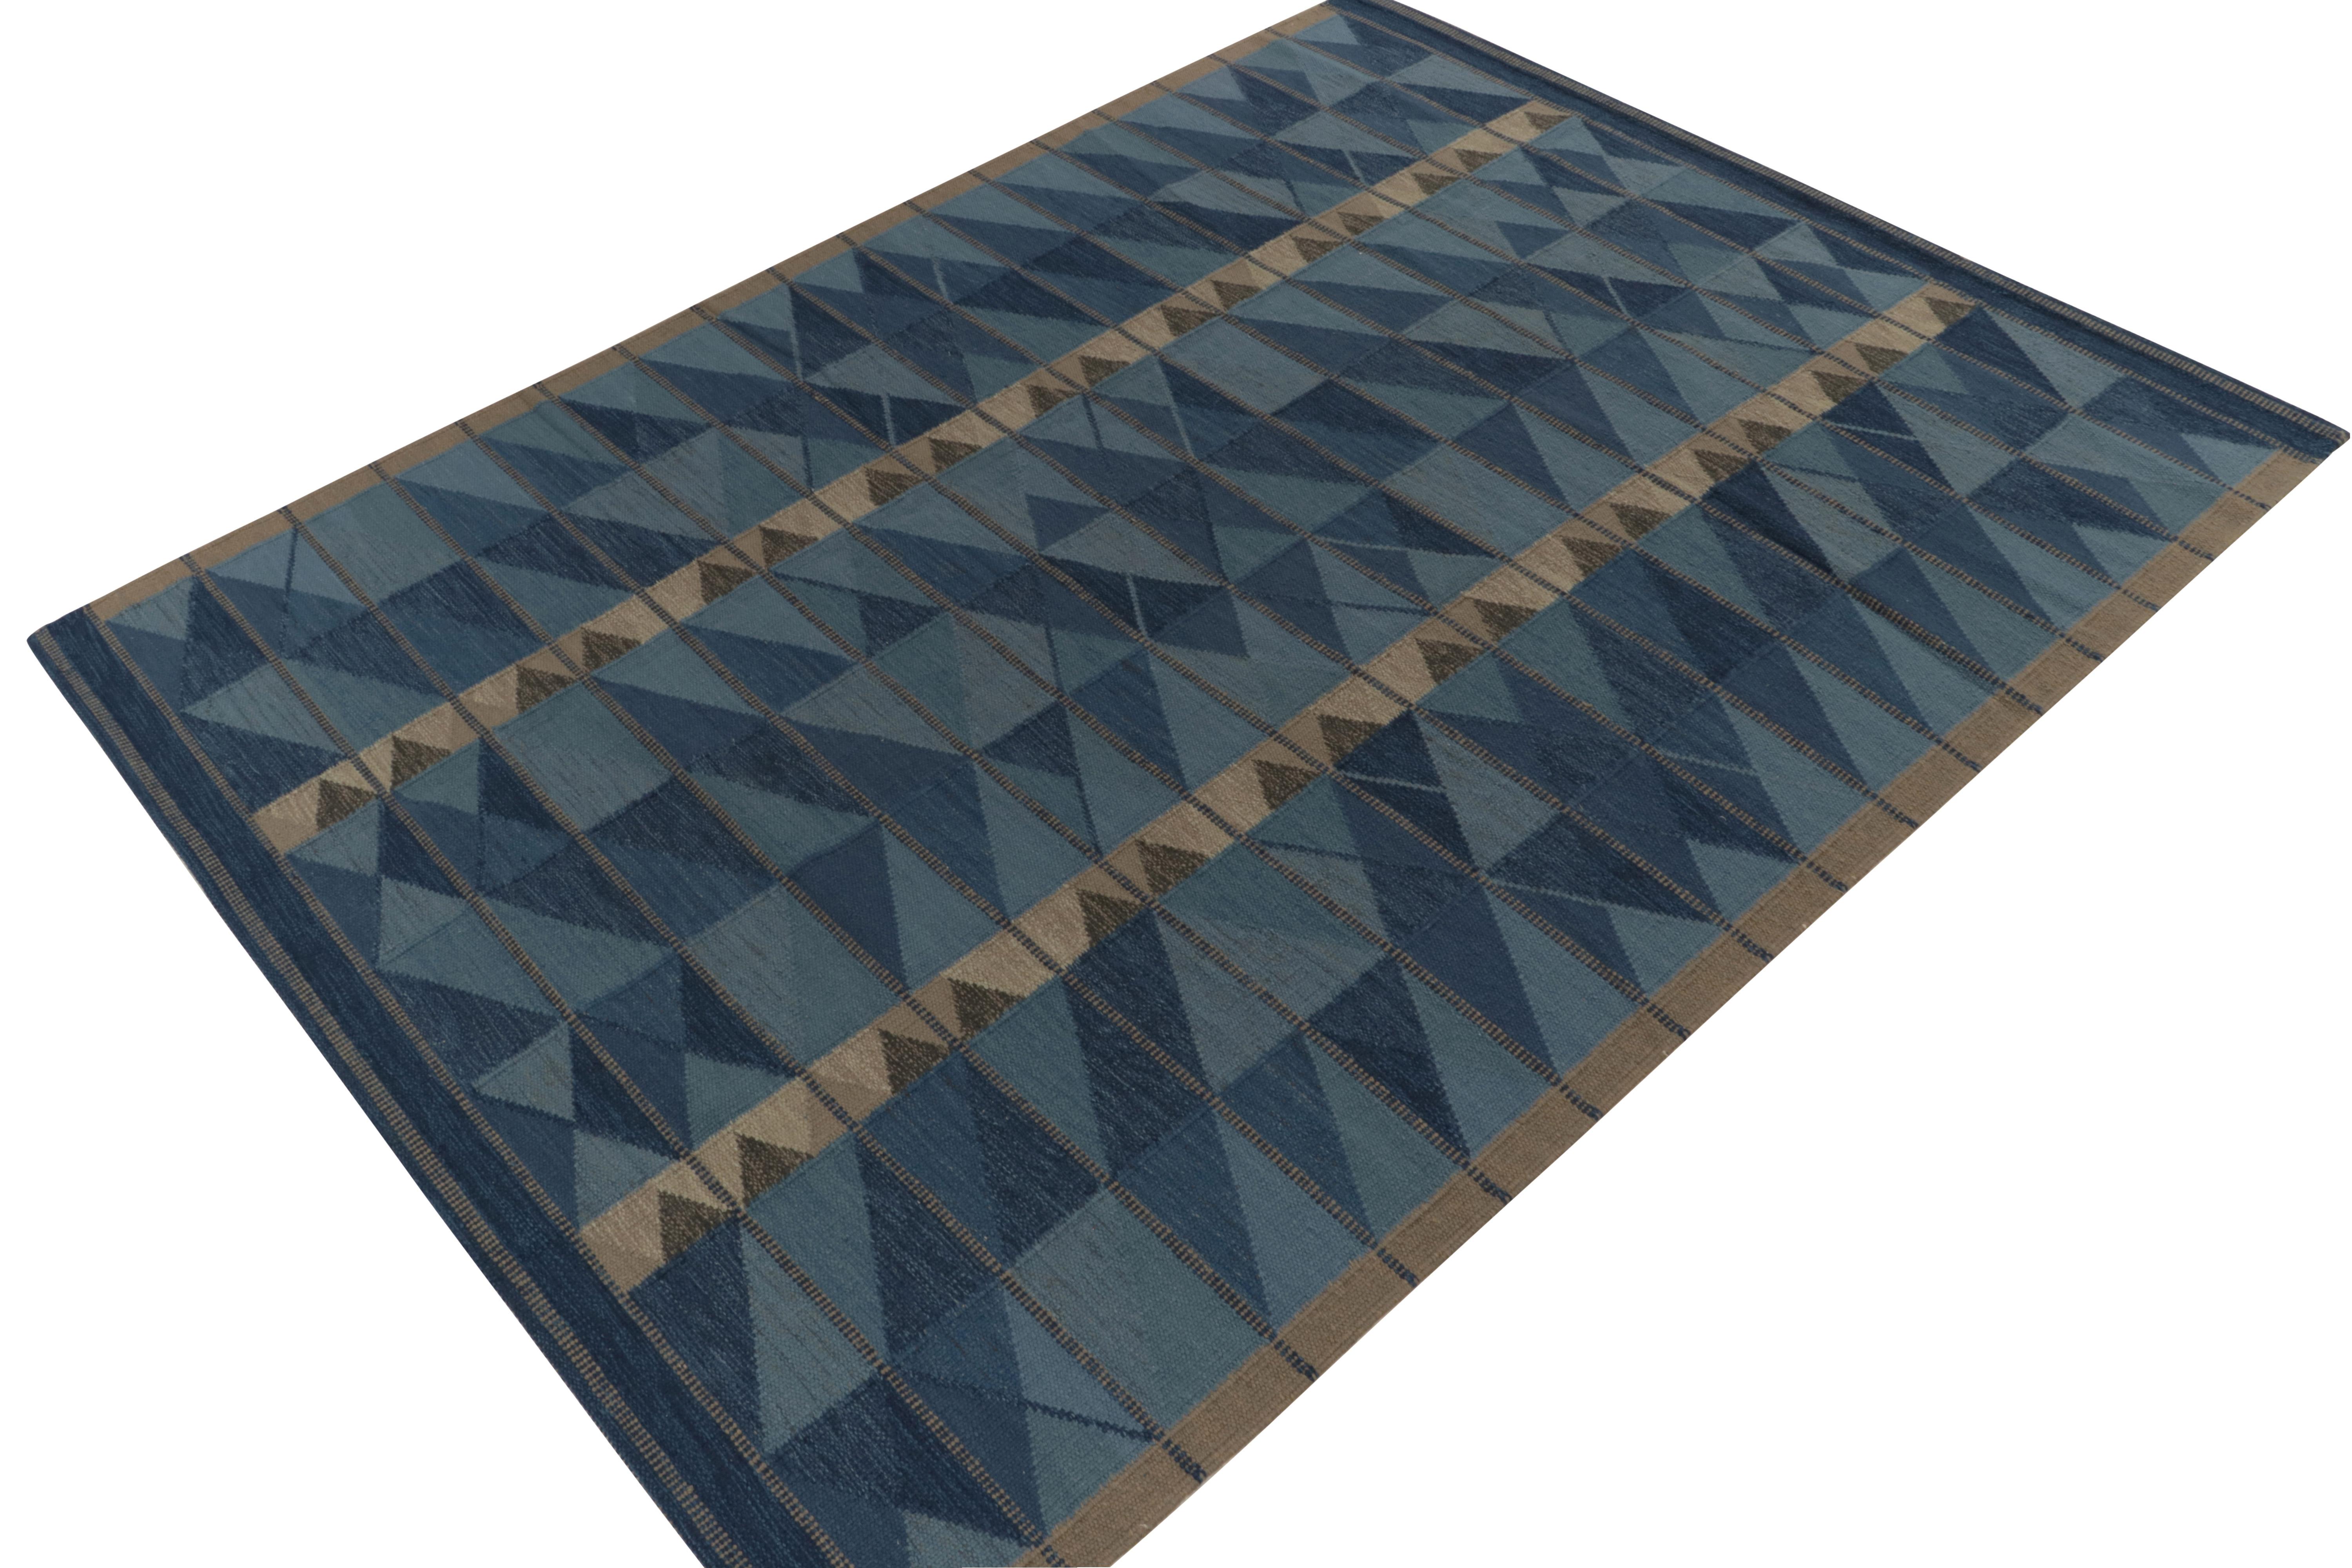 Rug & Kilim’s innovative take on Scandinavian Kilims, from our celebrated flatweave line of the titular award-winning collection. This 9x12 rug exemplifies the finesse of Swedish aesthetics with a smart geometric pattern casting an almost 3D